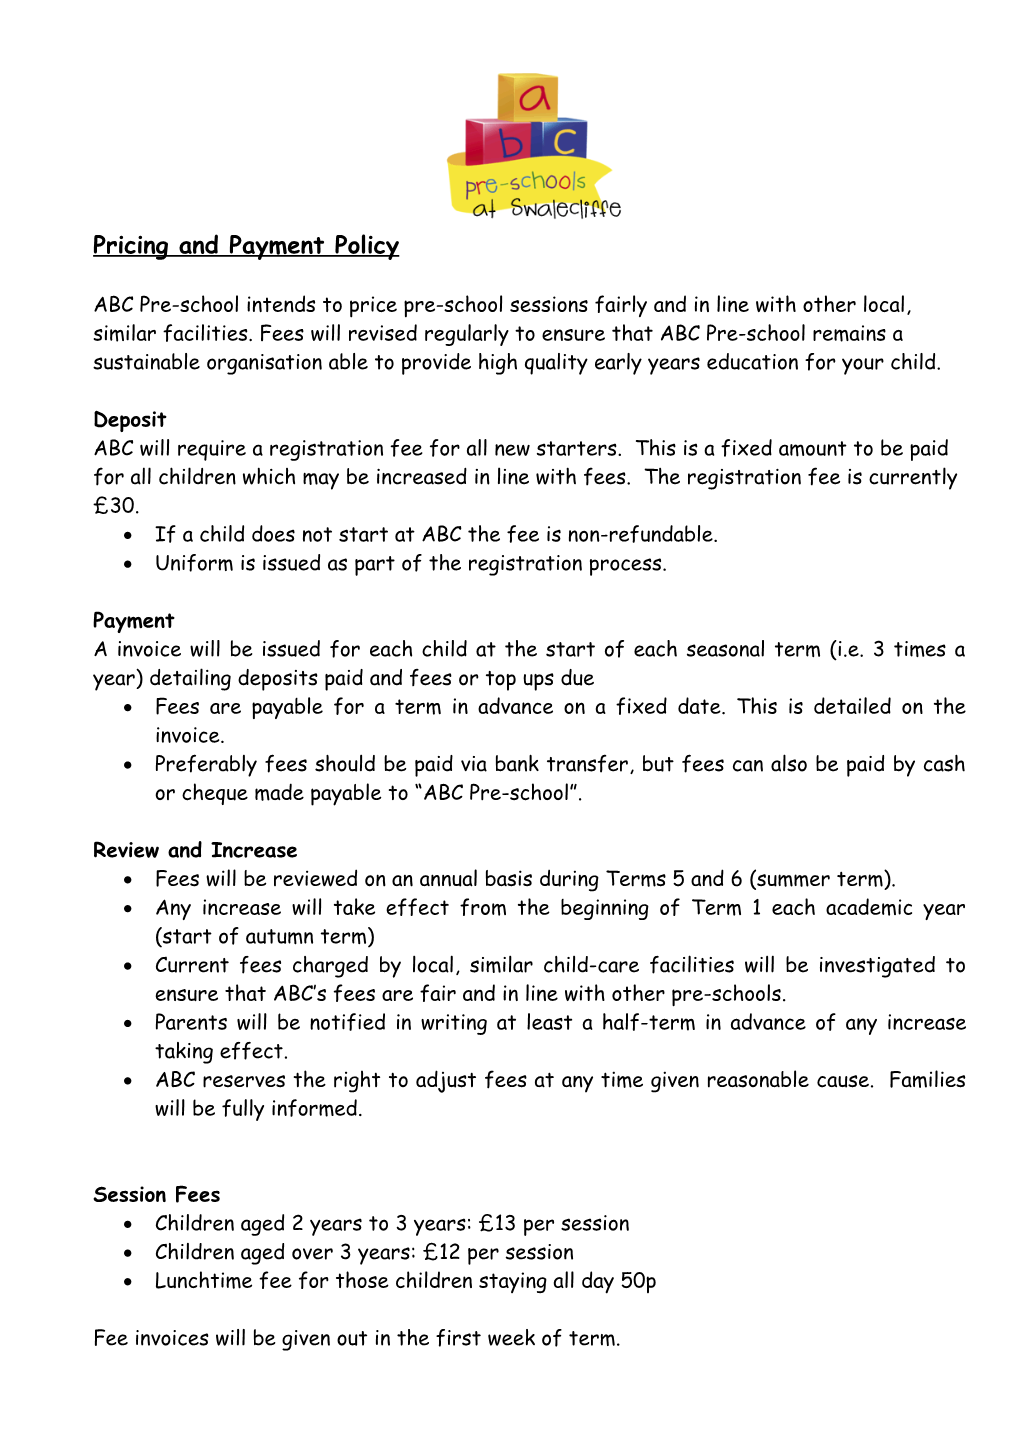 Pricing and Payment Policy